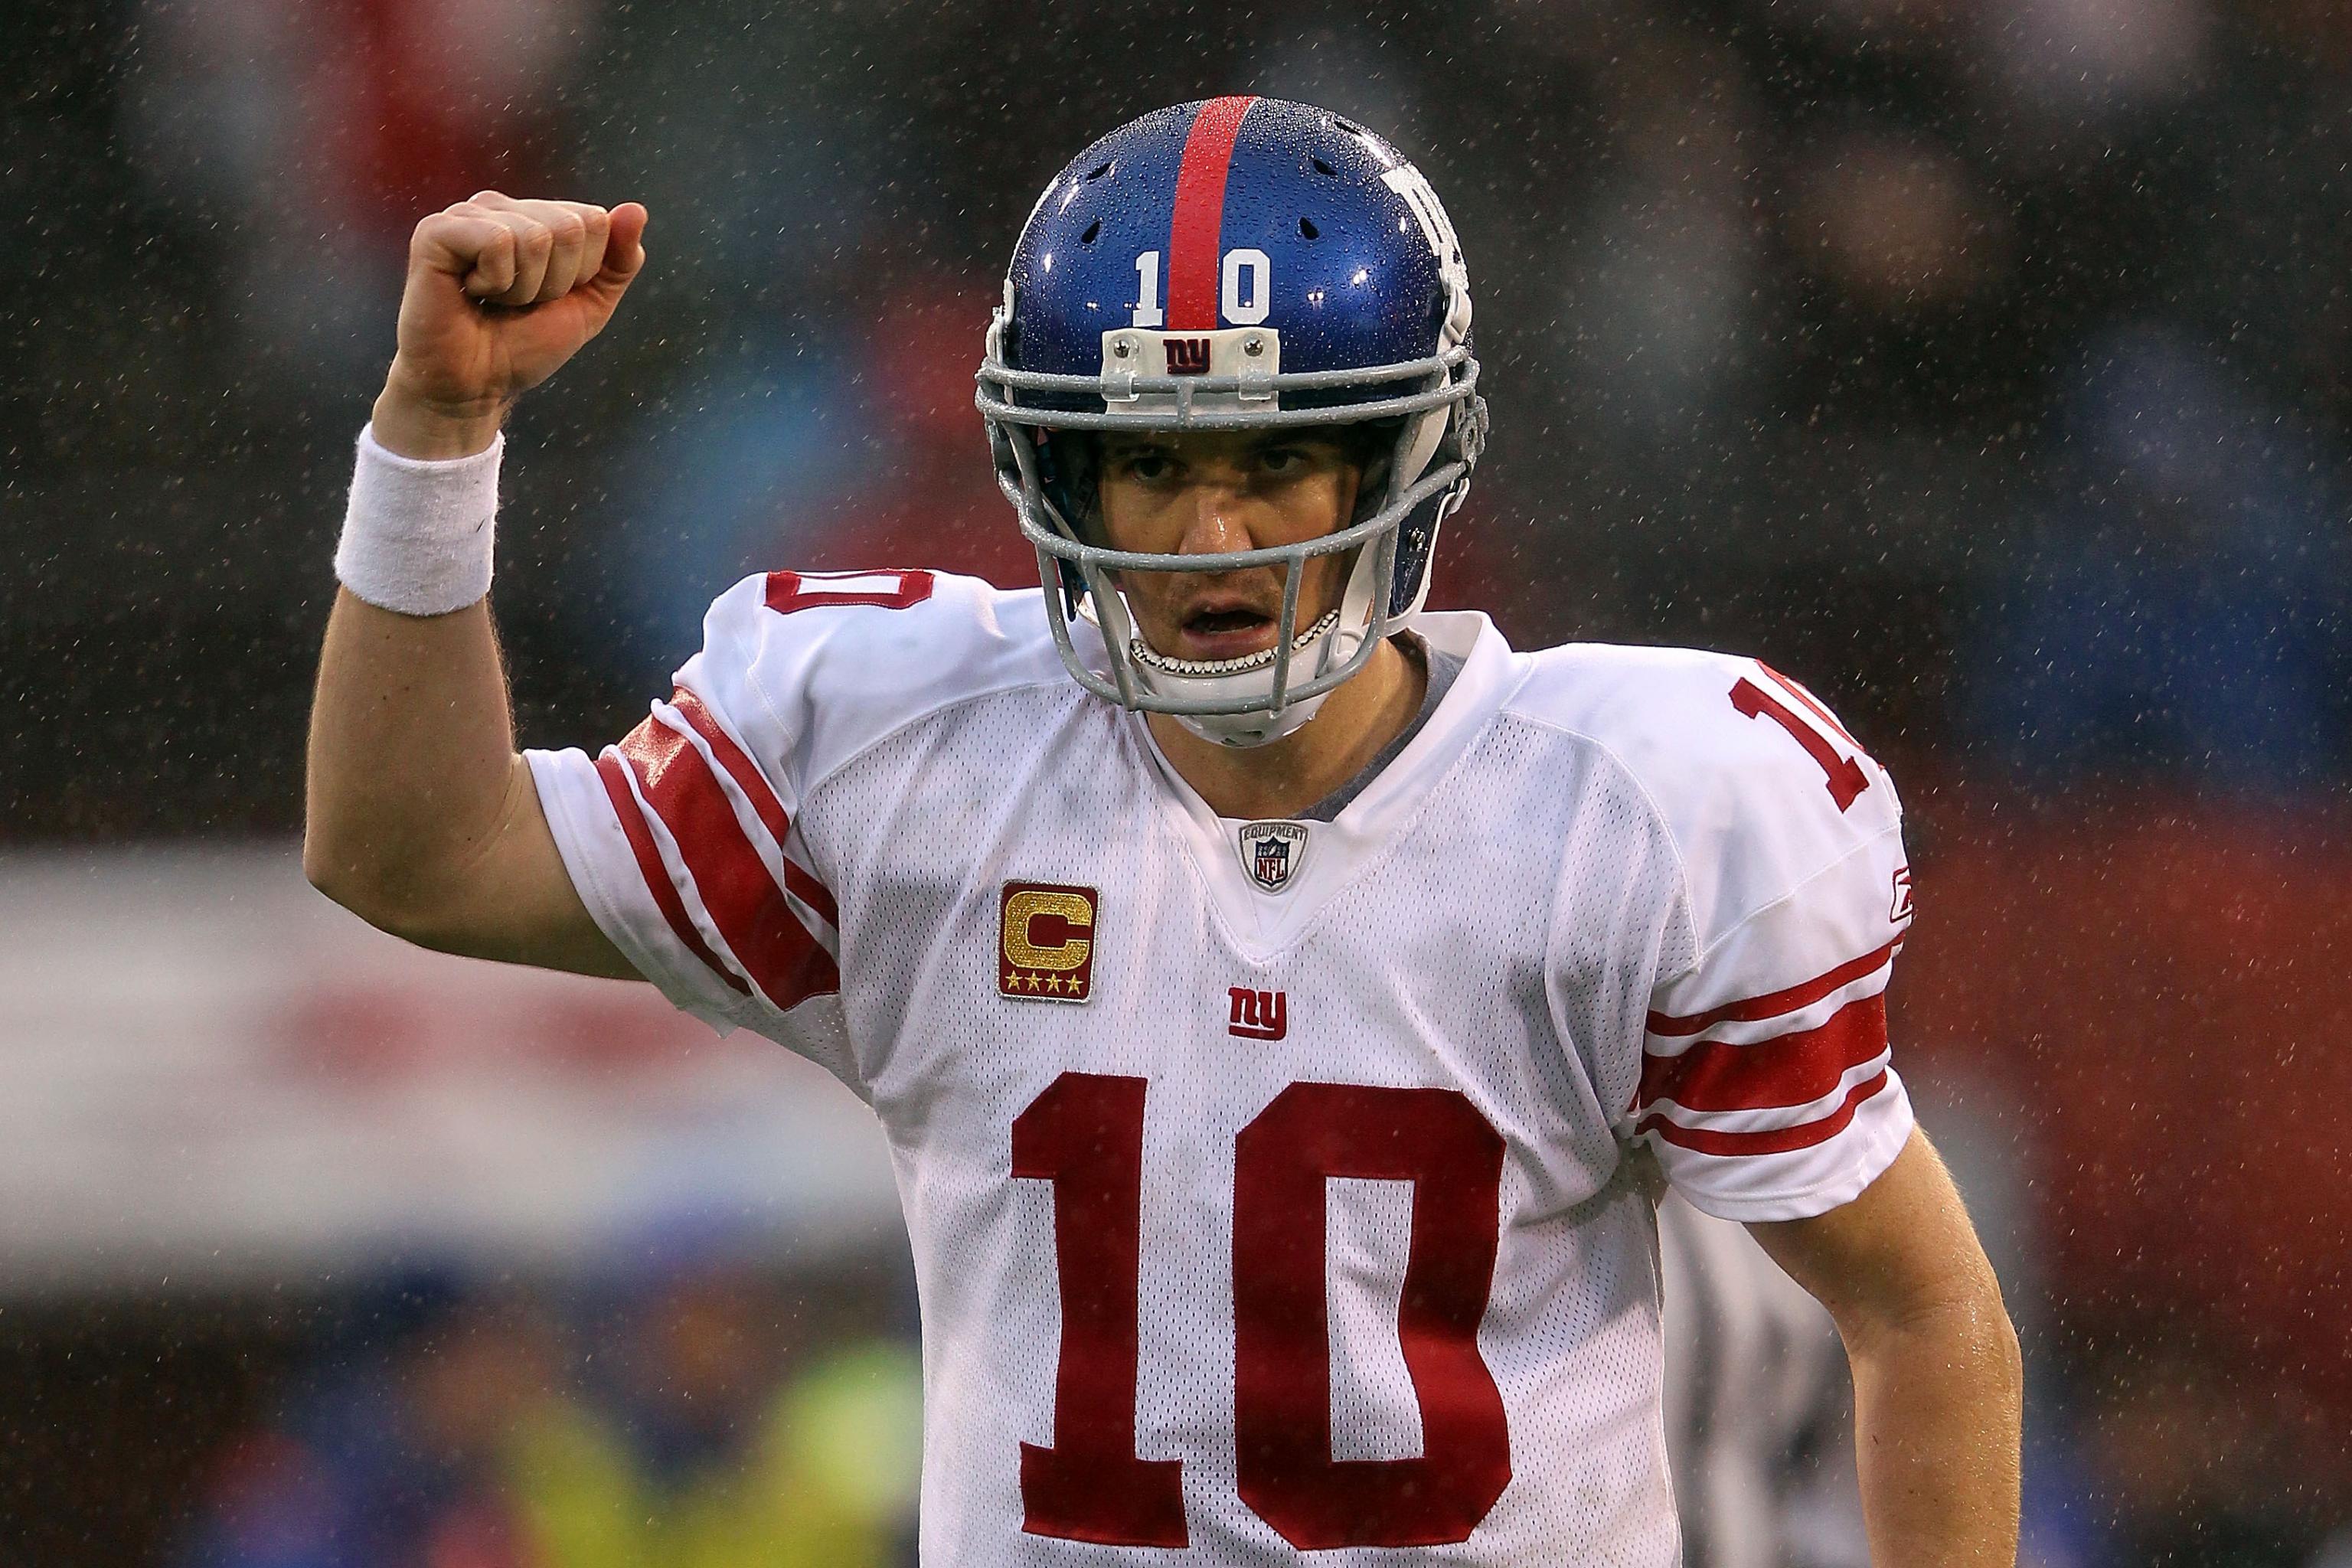 Some interviews after Super Bowl XLII seemed to suggest that Eli